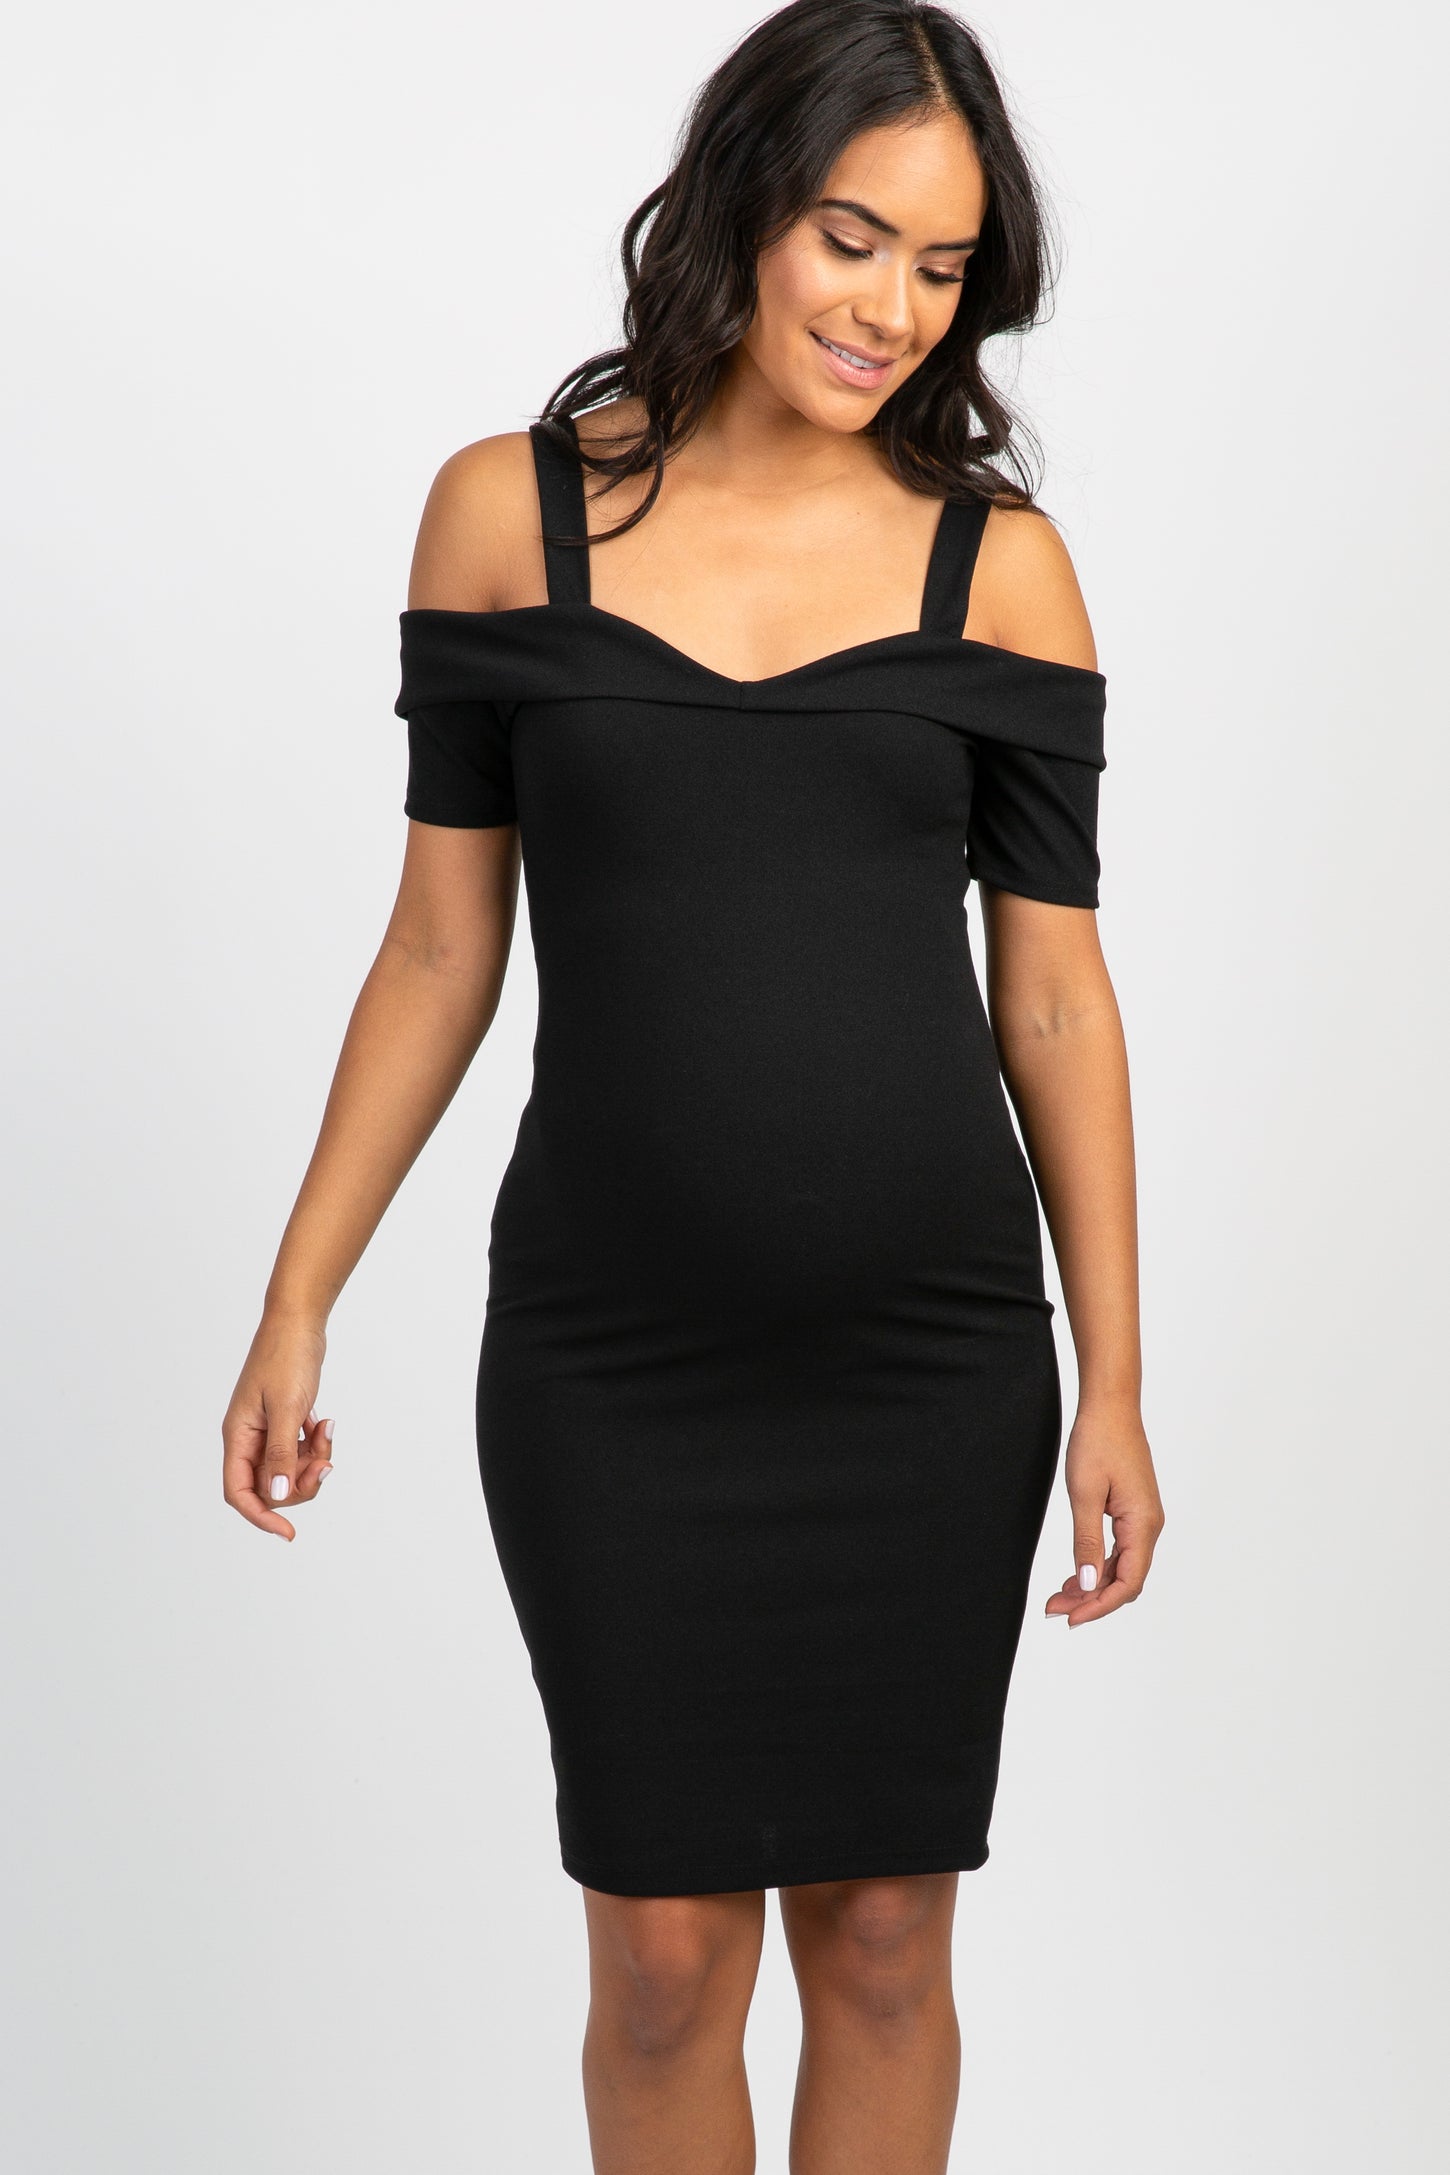 PinkBlush Black Solid Cold Shoulder Maternity Fitted Dress